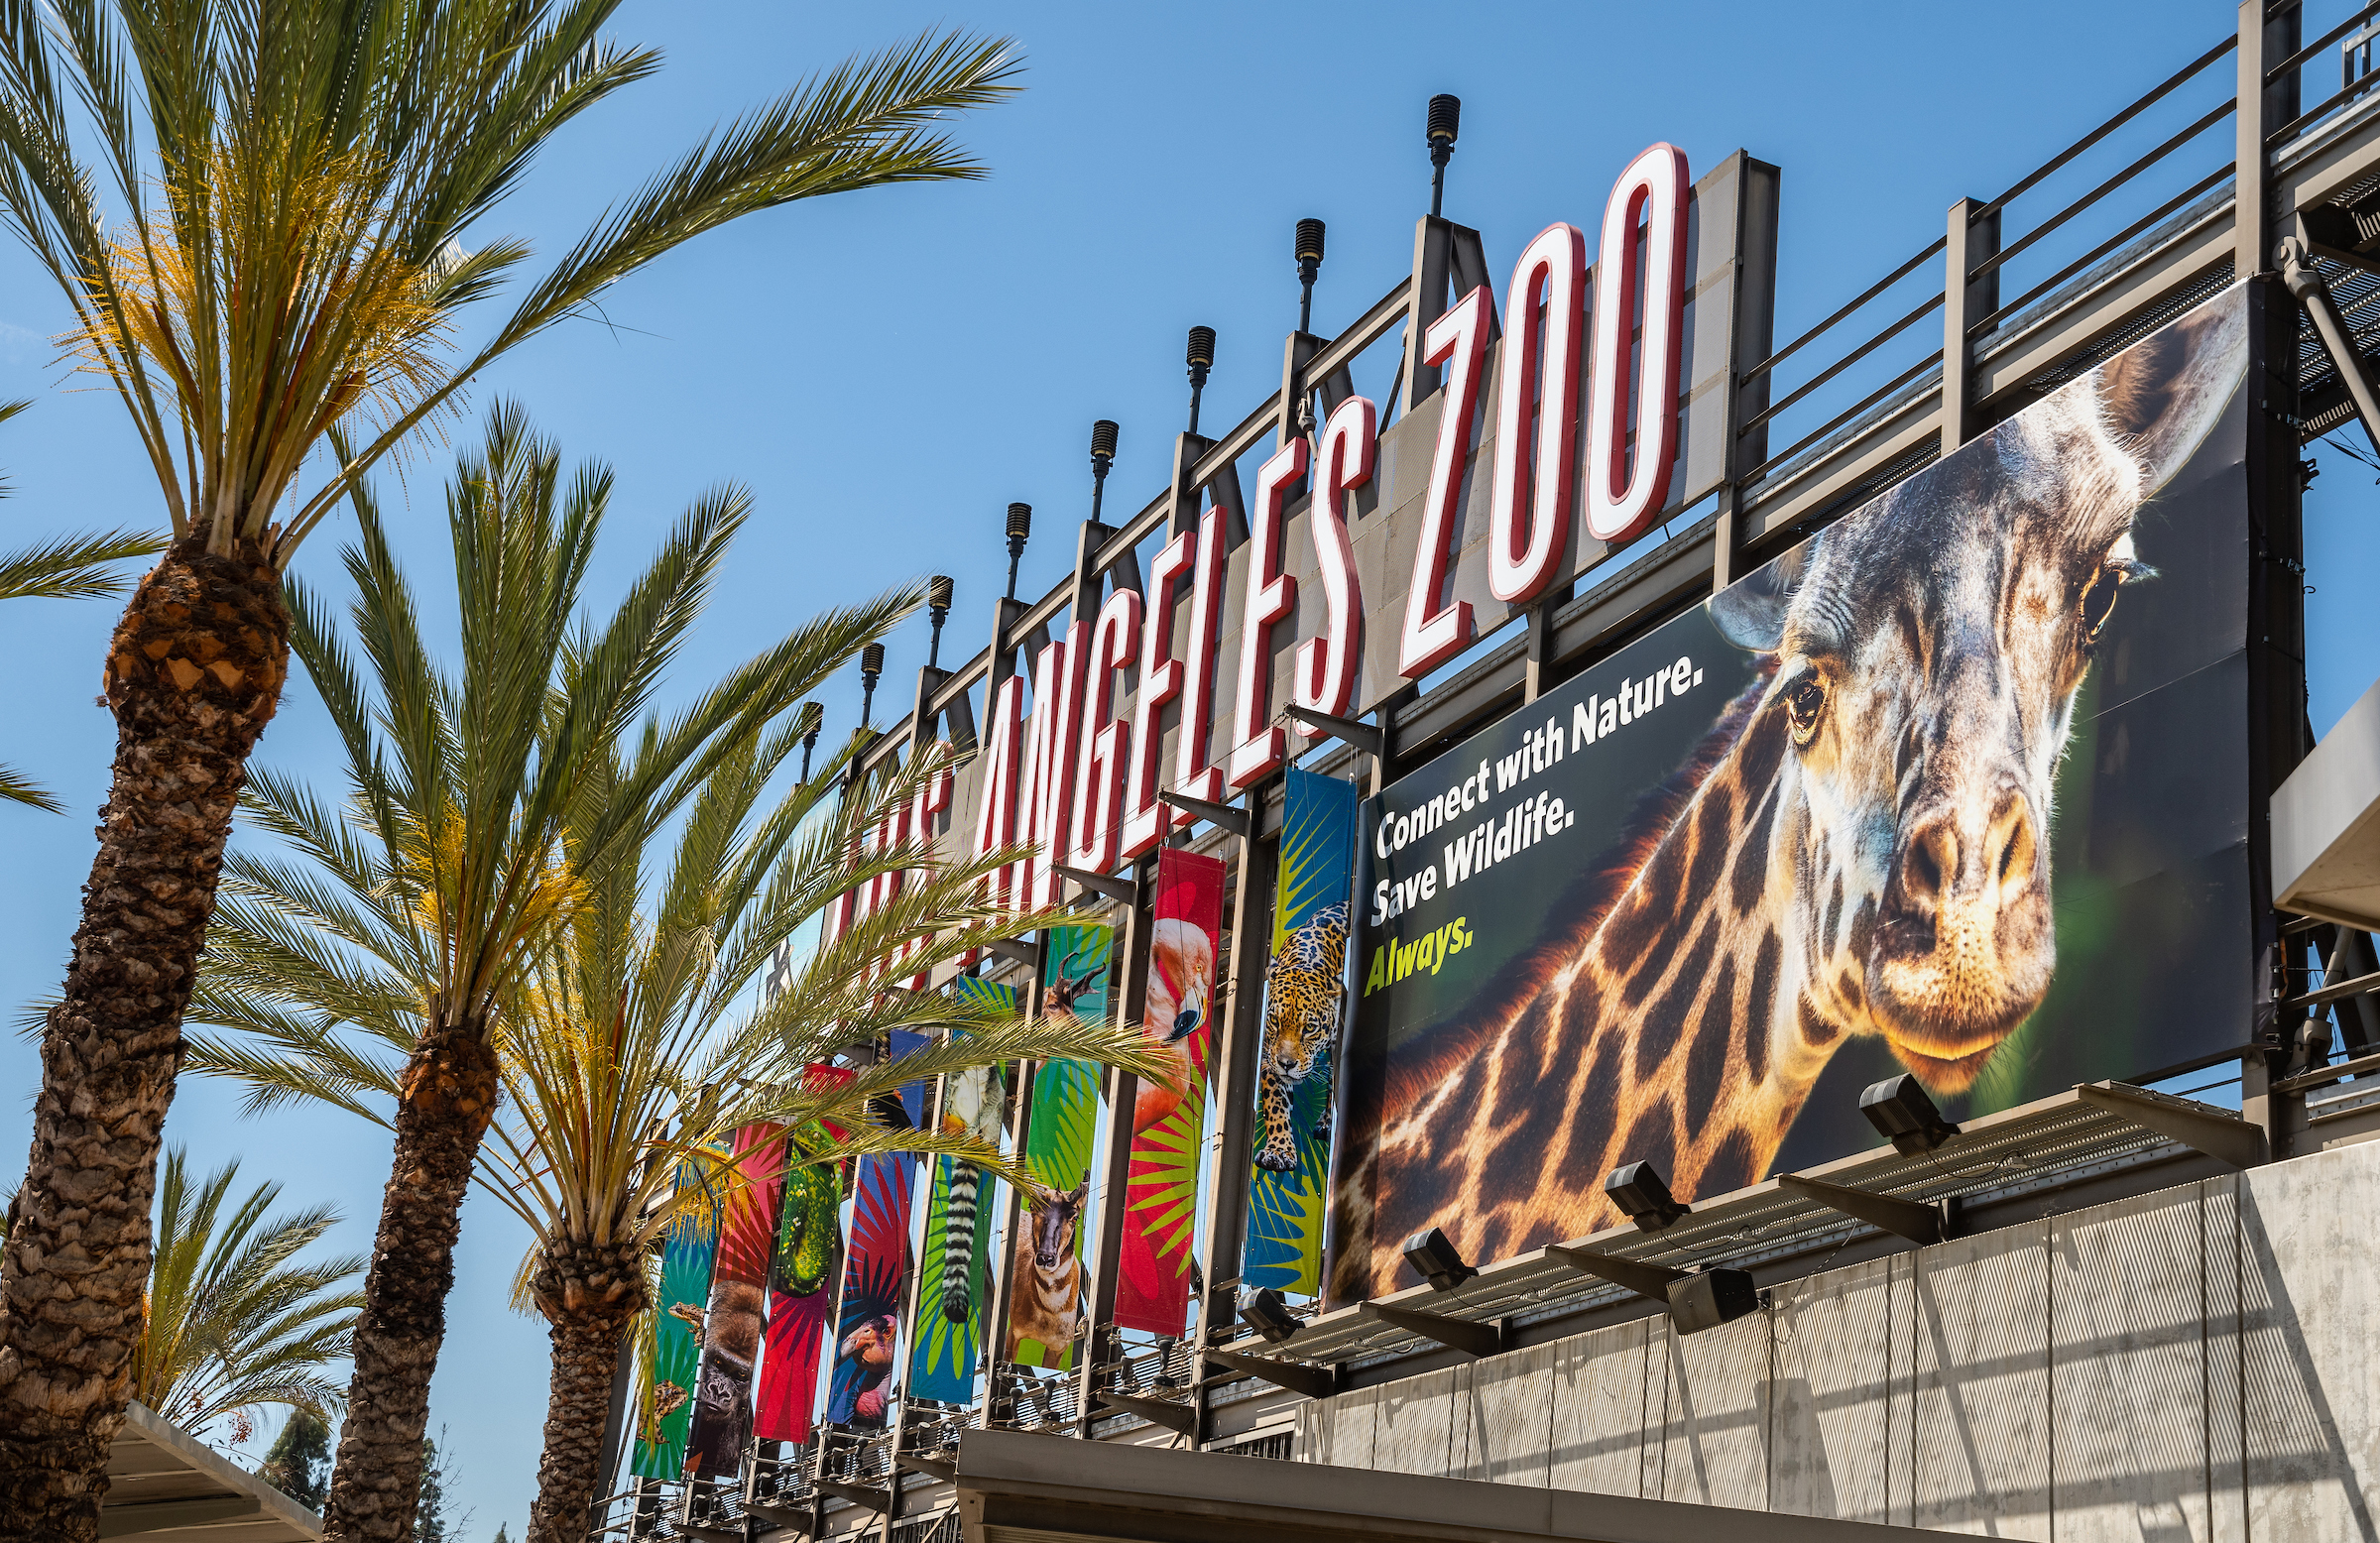 The front entry sign for the Los Angeles Zoo, featuring a giraffe billboard in the right foreground.